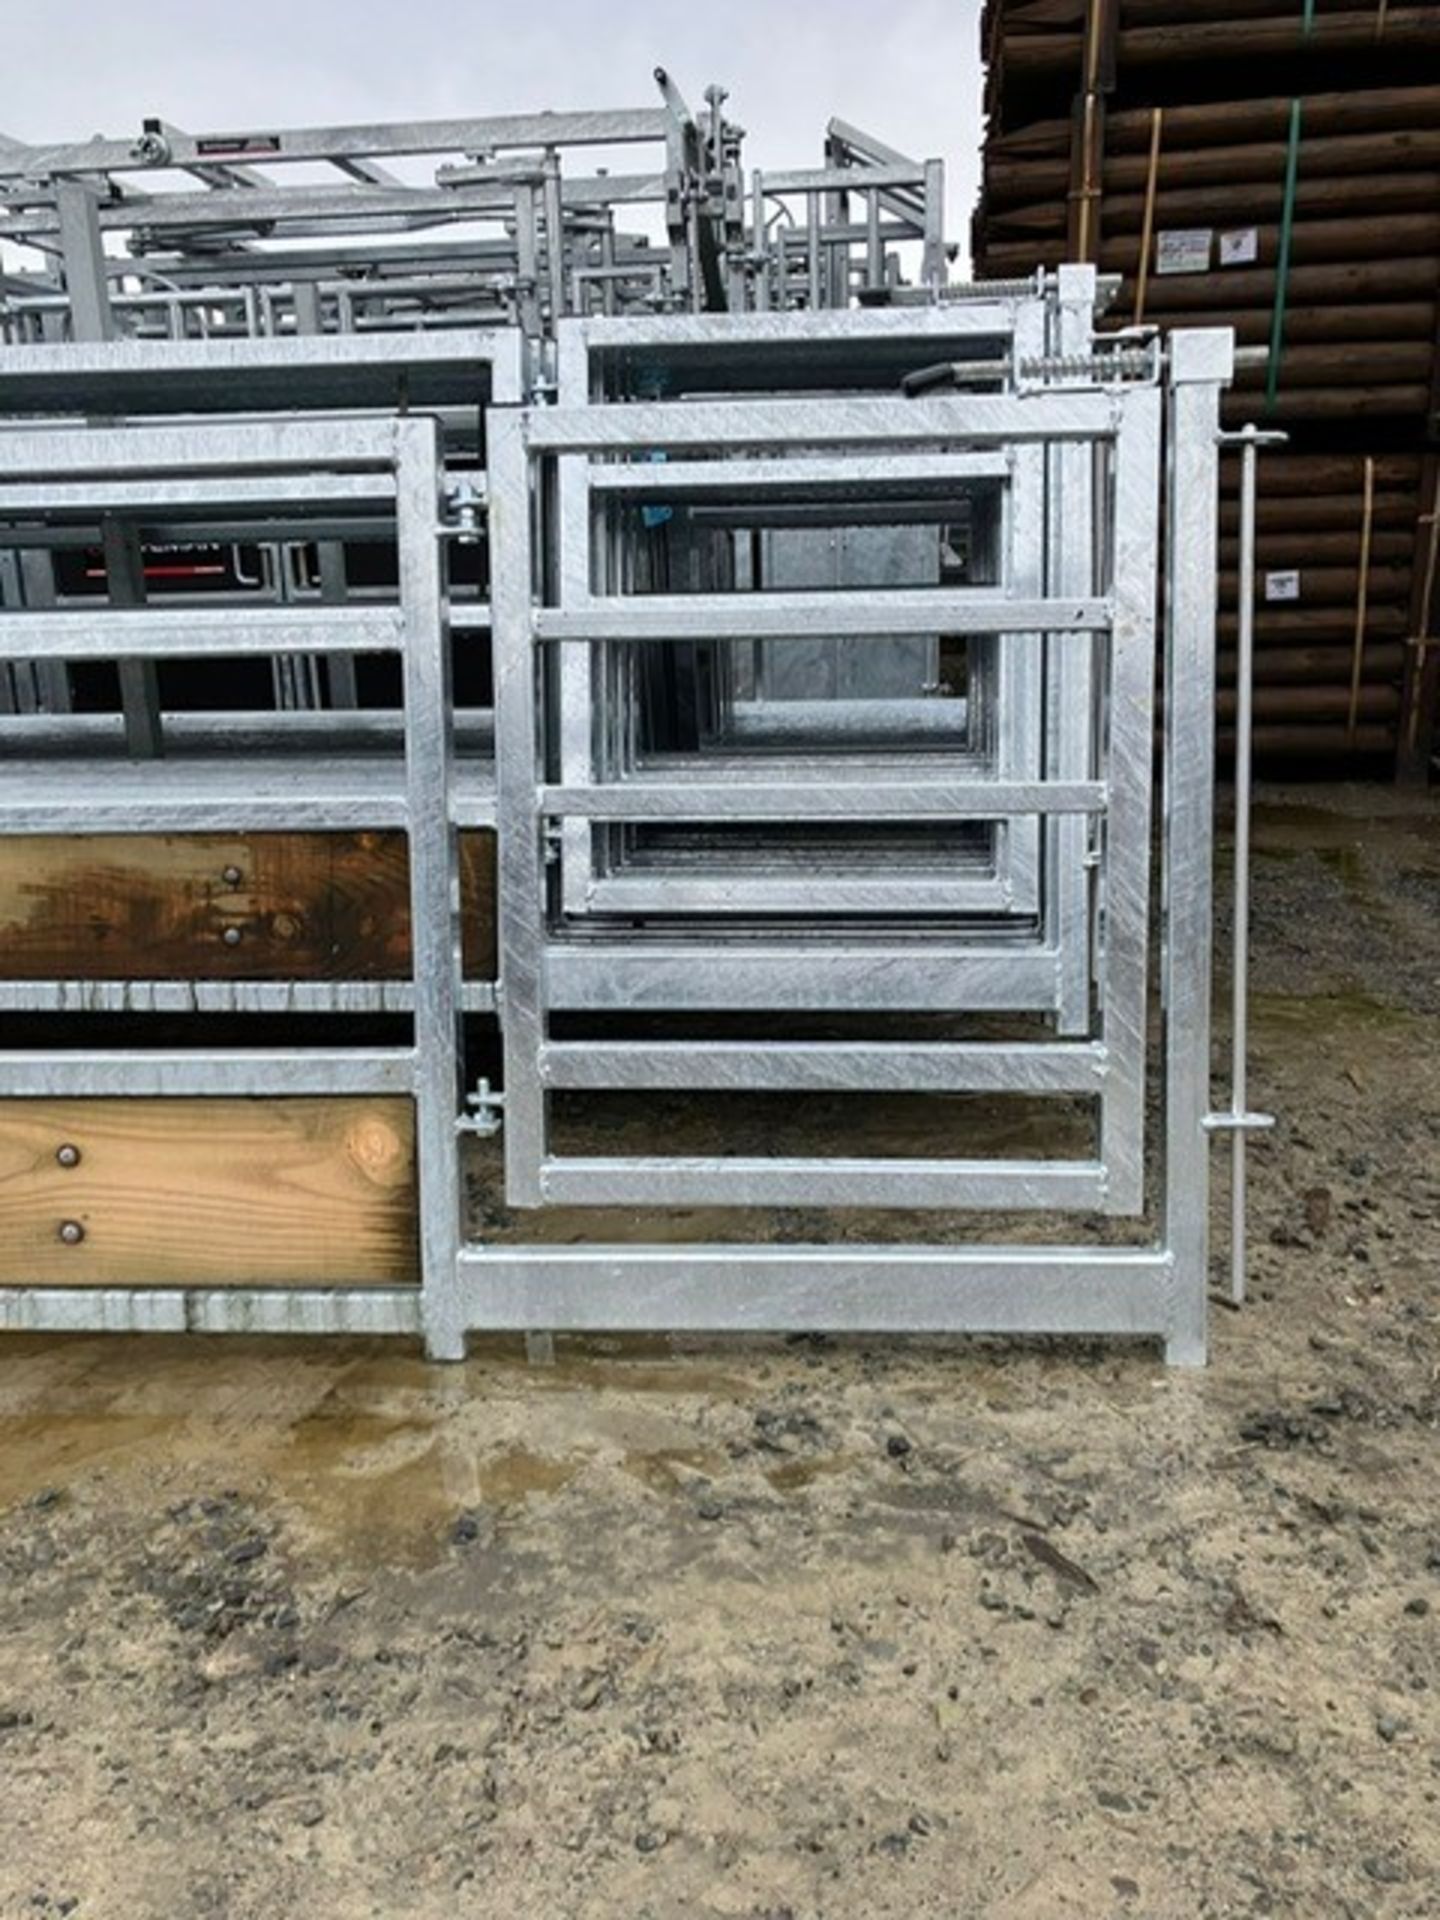 1 X 20ft HEAVY DUTY SHEEP FEED BARRIER - Image 3 of 3